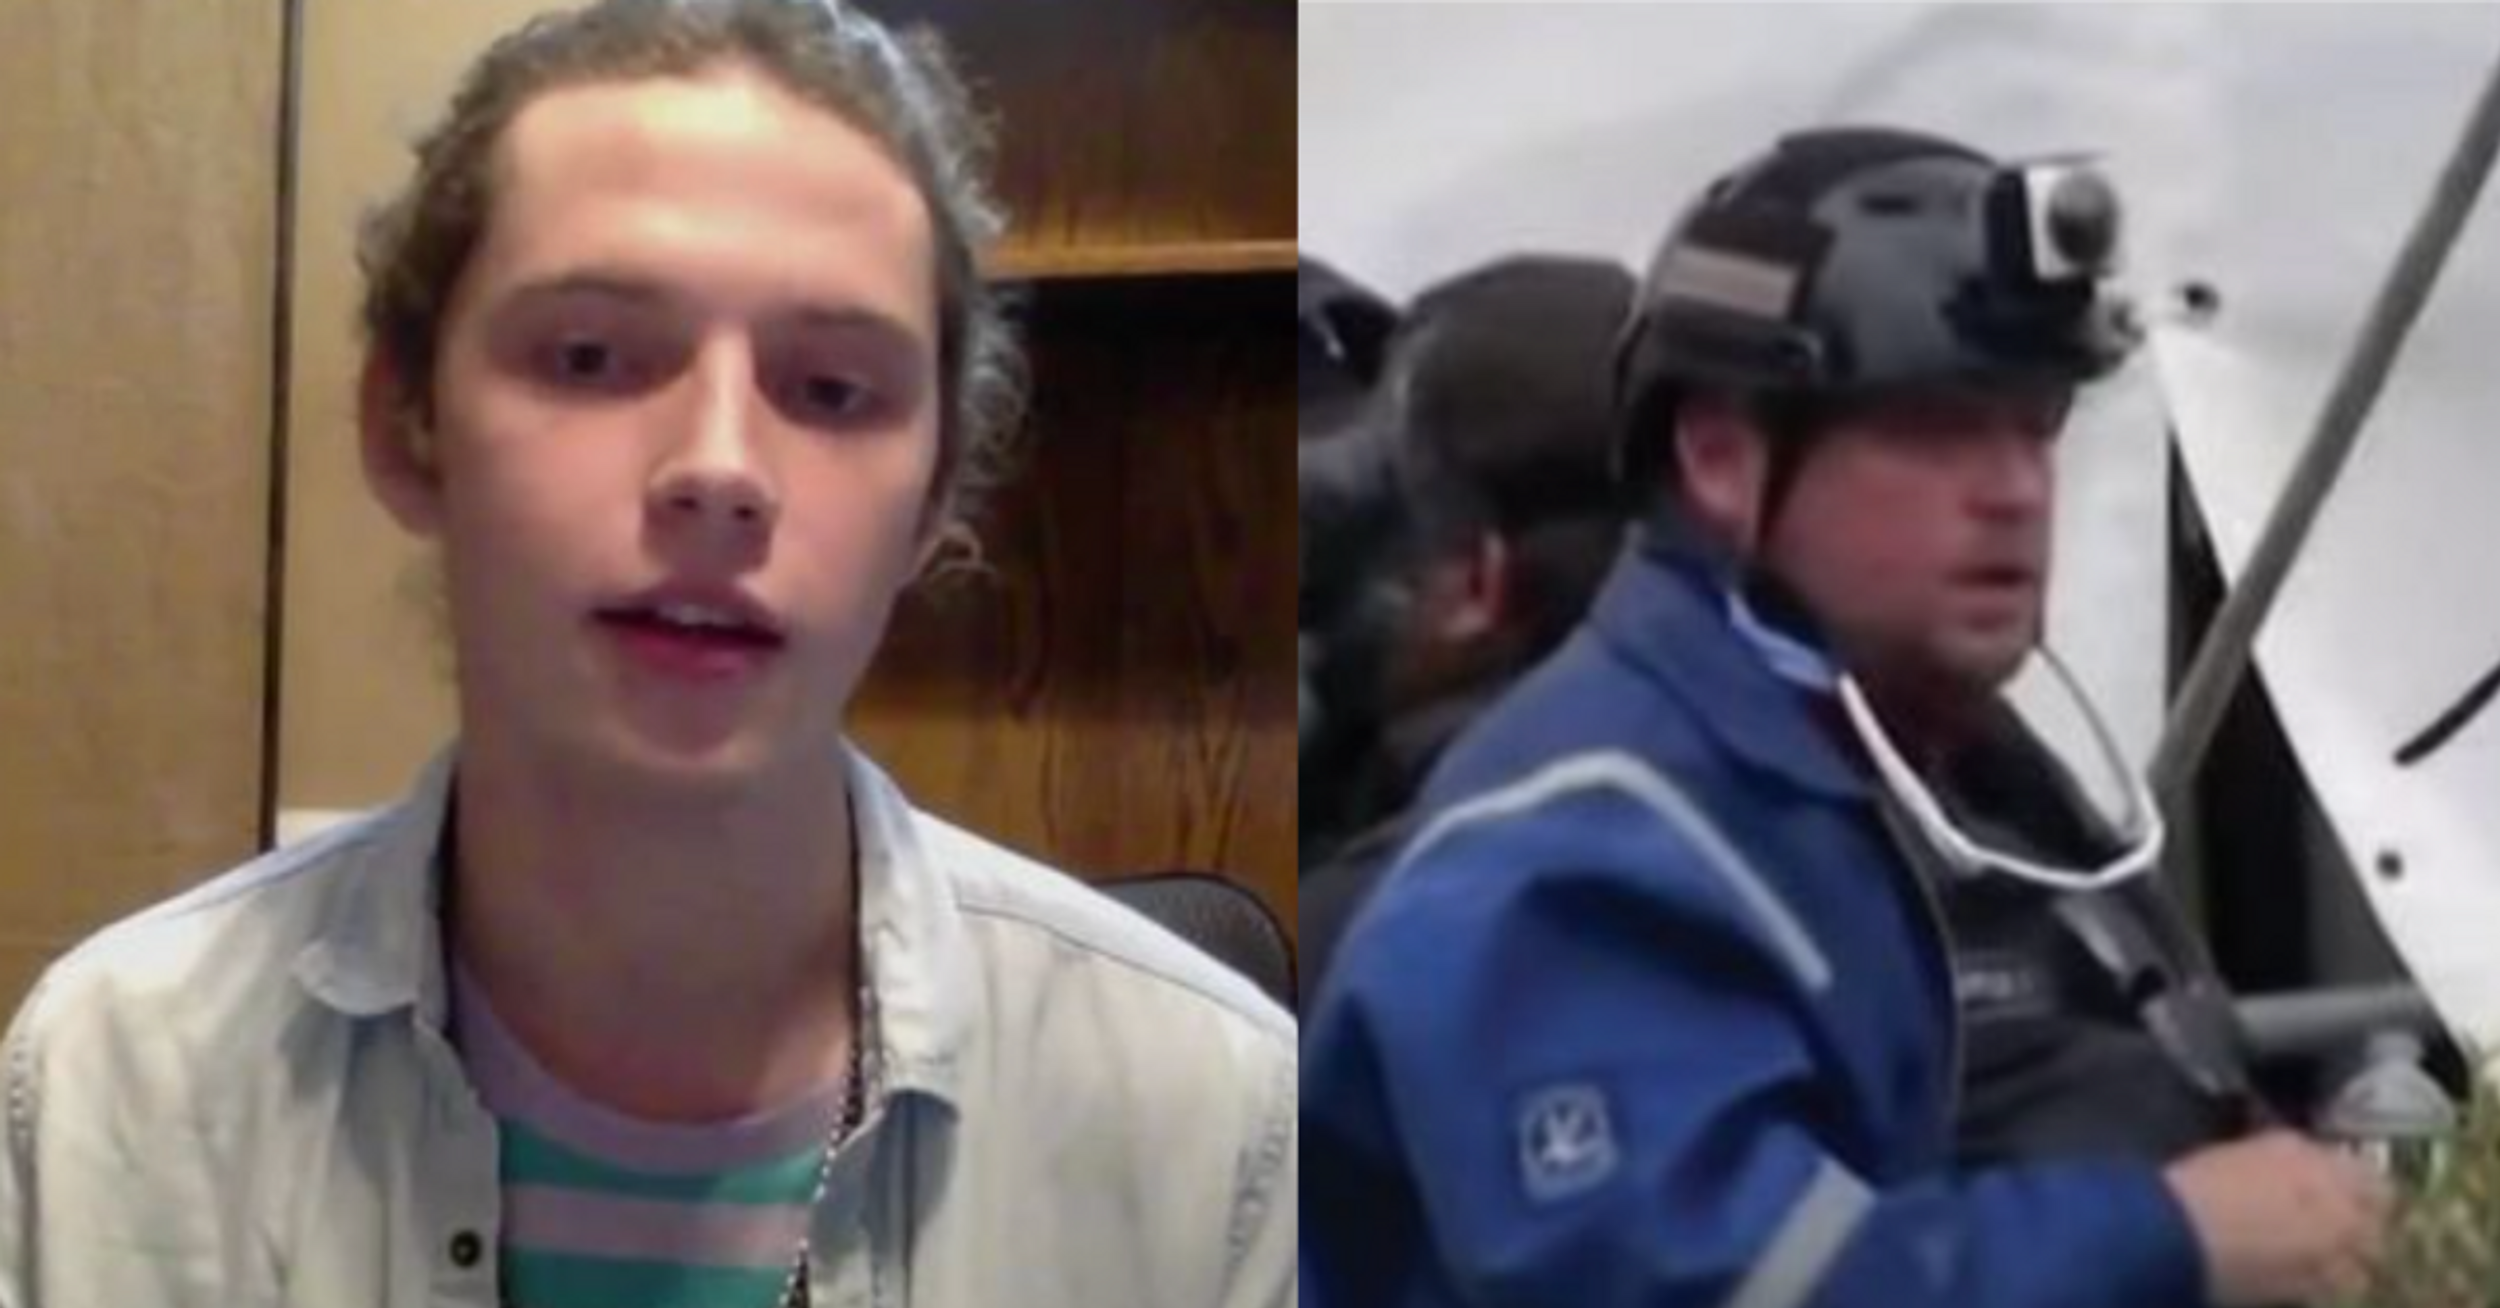 College Fund For Texas Teen Who Alerted FBI About His Capitol Rioter Dad Raises Over $130k